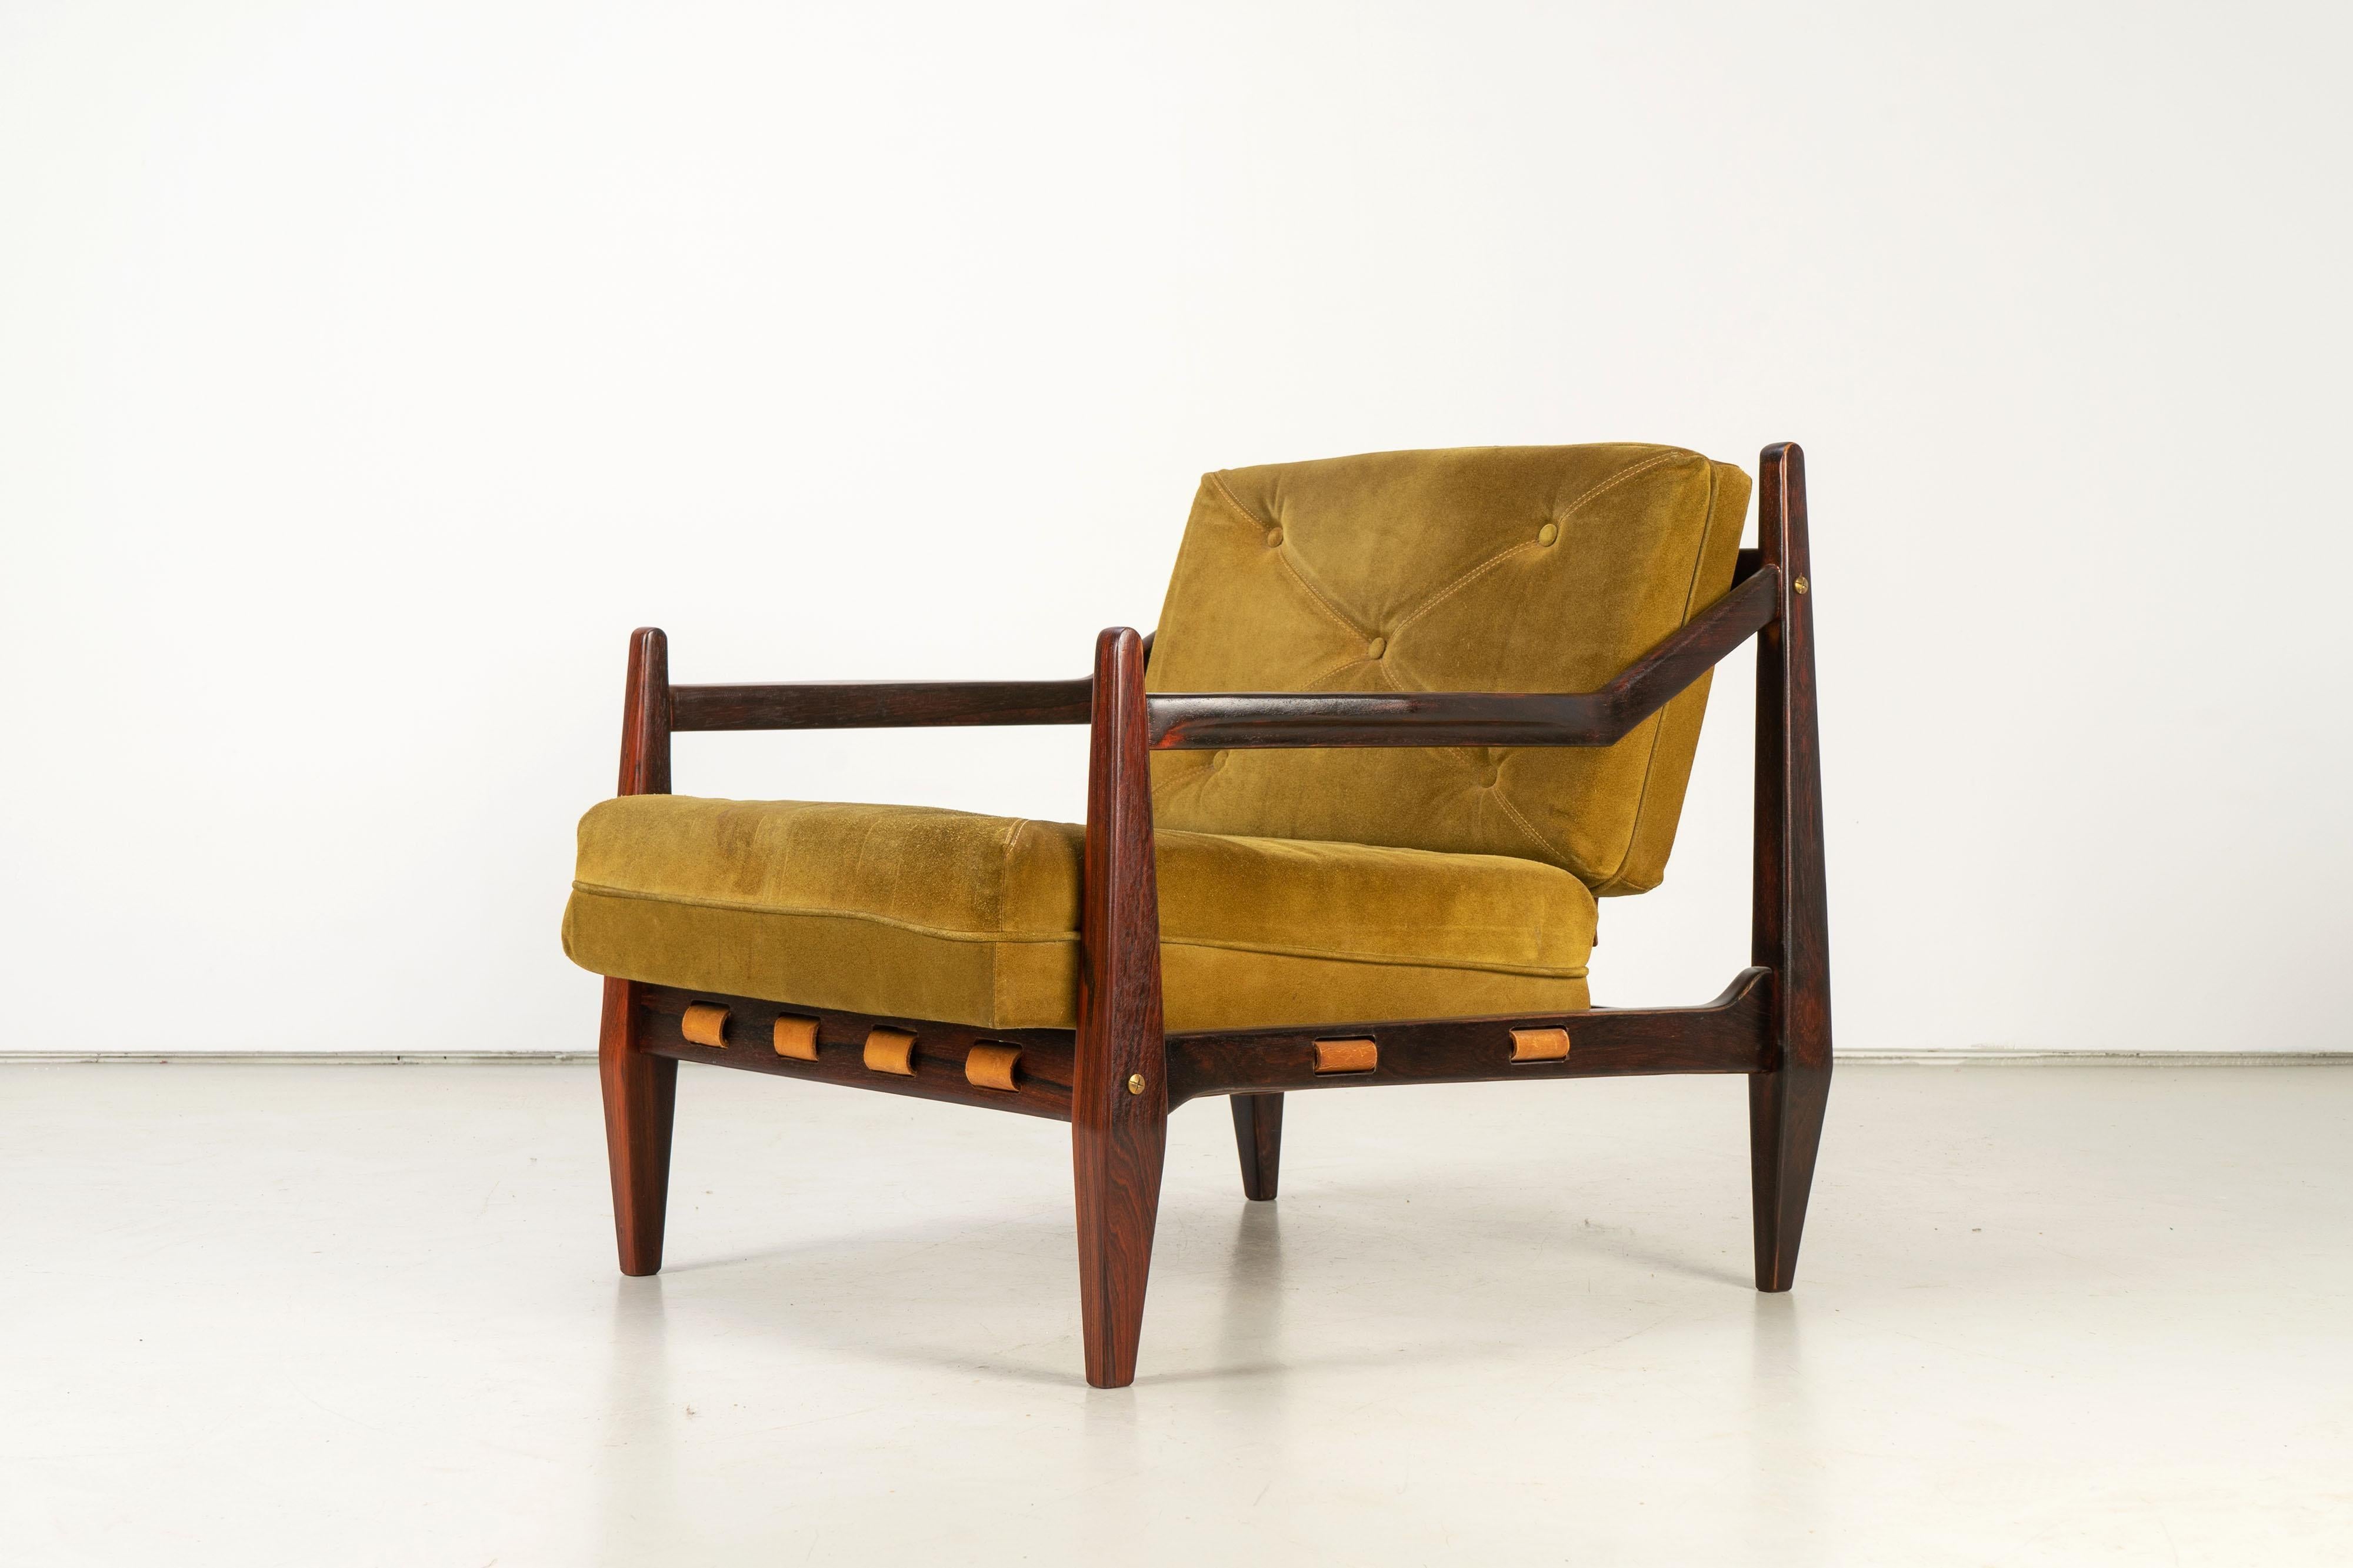 Rare rosewood armchair with ottoman by Jean Gillon from the 1960s. Ottoman and armchair has been refinished but has original suede cushions. The buyer receives the CITES permit with the purchase (see pictures). 

Measures: Chair - 75 x 75 x 75/38